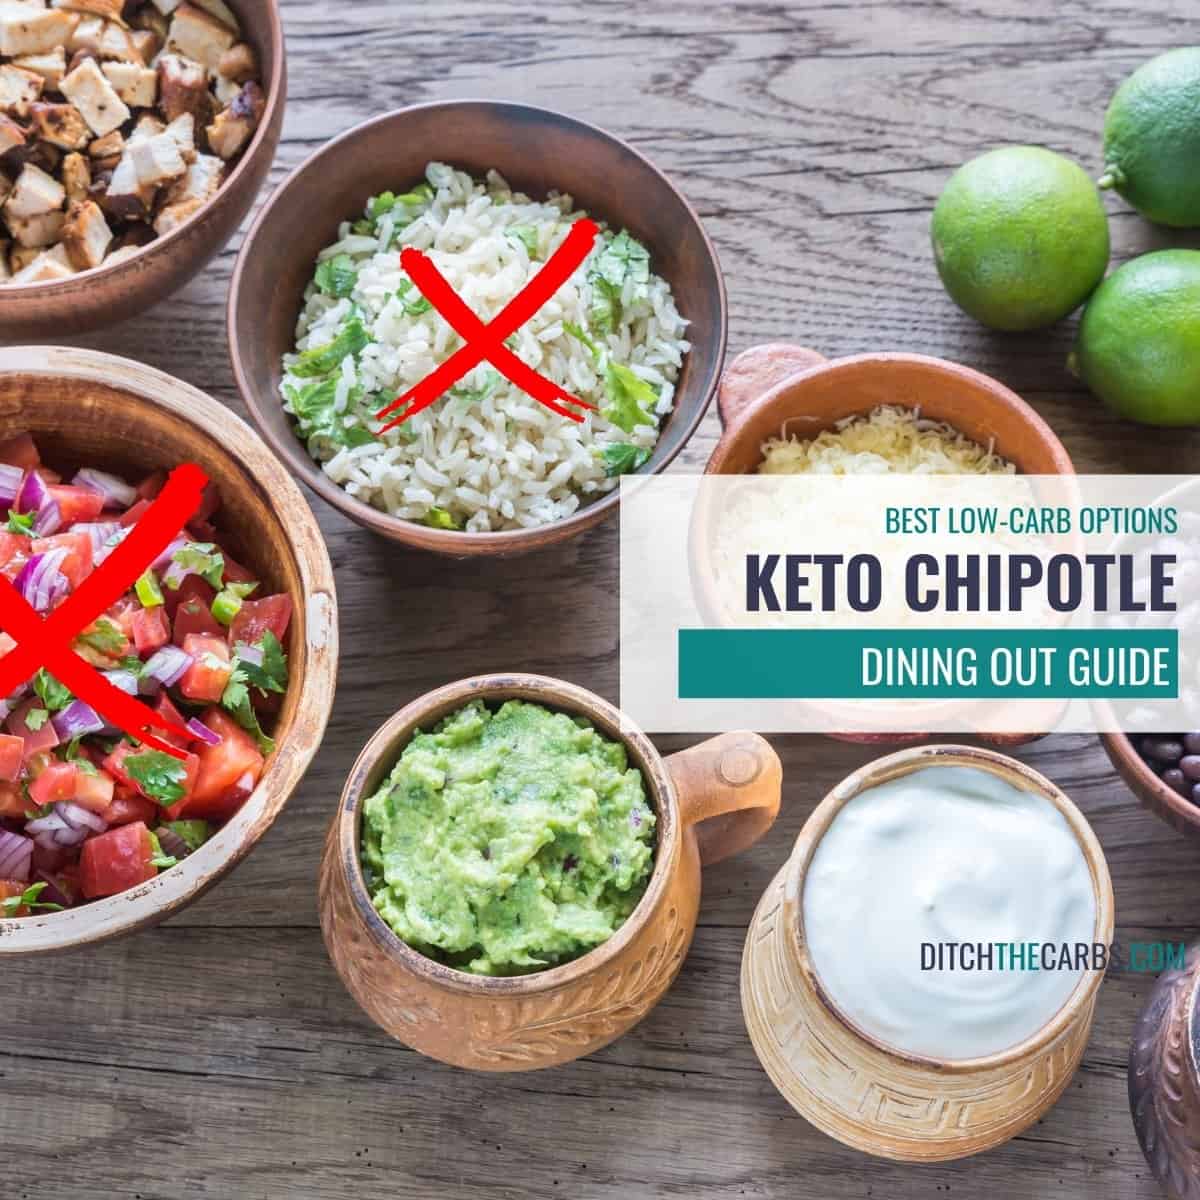 Keto Chipotle: The Best Low Carb Menu Options (in 2021)